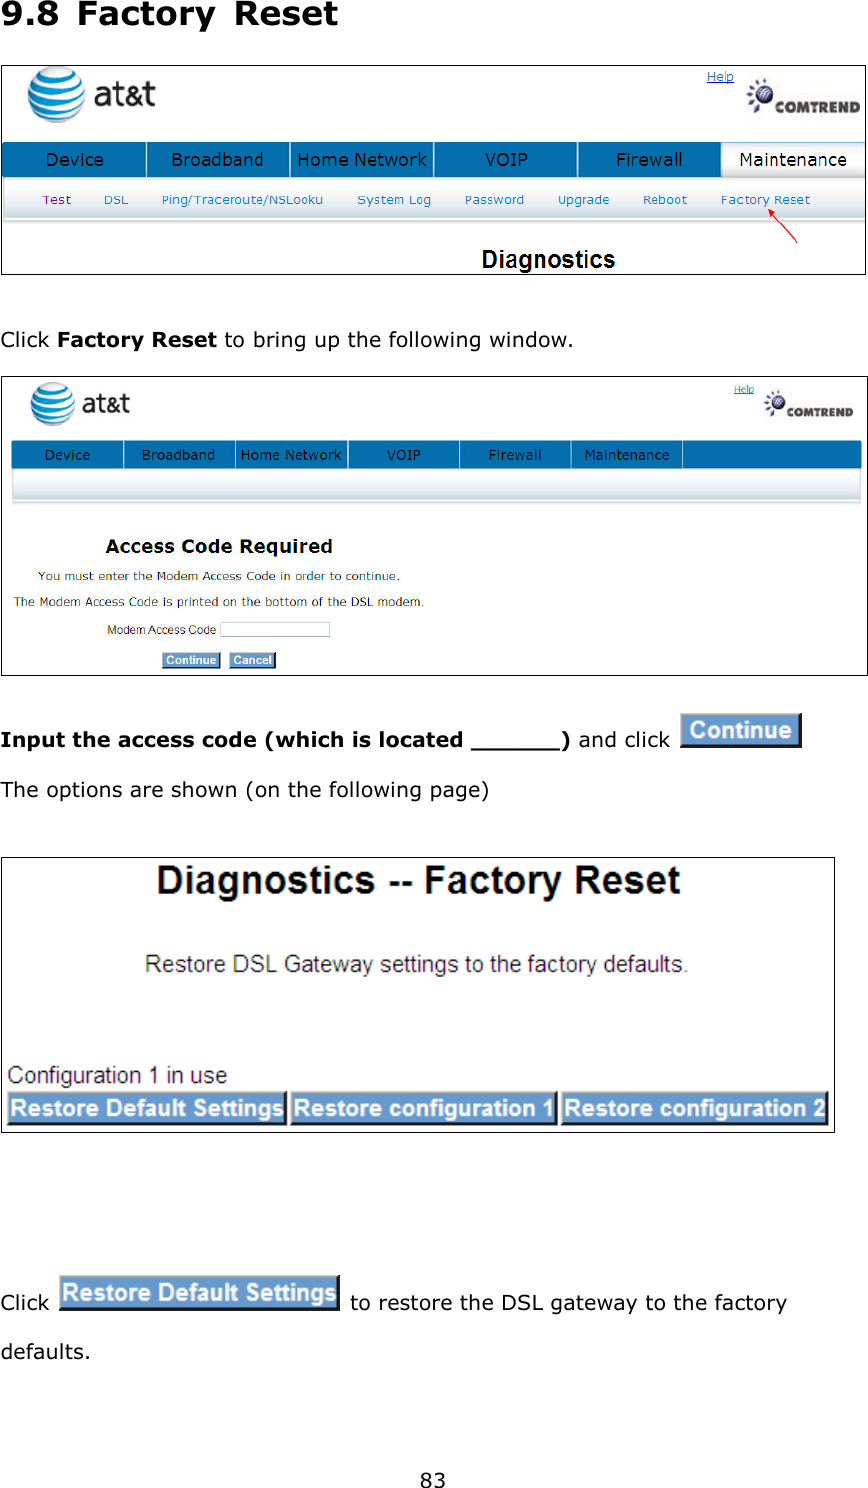 83 9.8  Factory  Reset  Click Factory Reset to bring up the following window. Input the access code (which is located ______) and click   The options are shown (on the following page)      Click    to restore the DSL gateway to the factory defaults.  